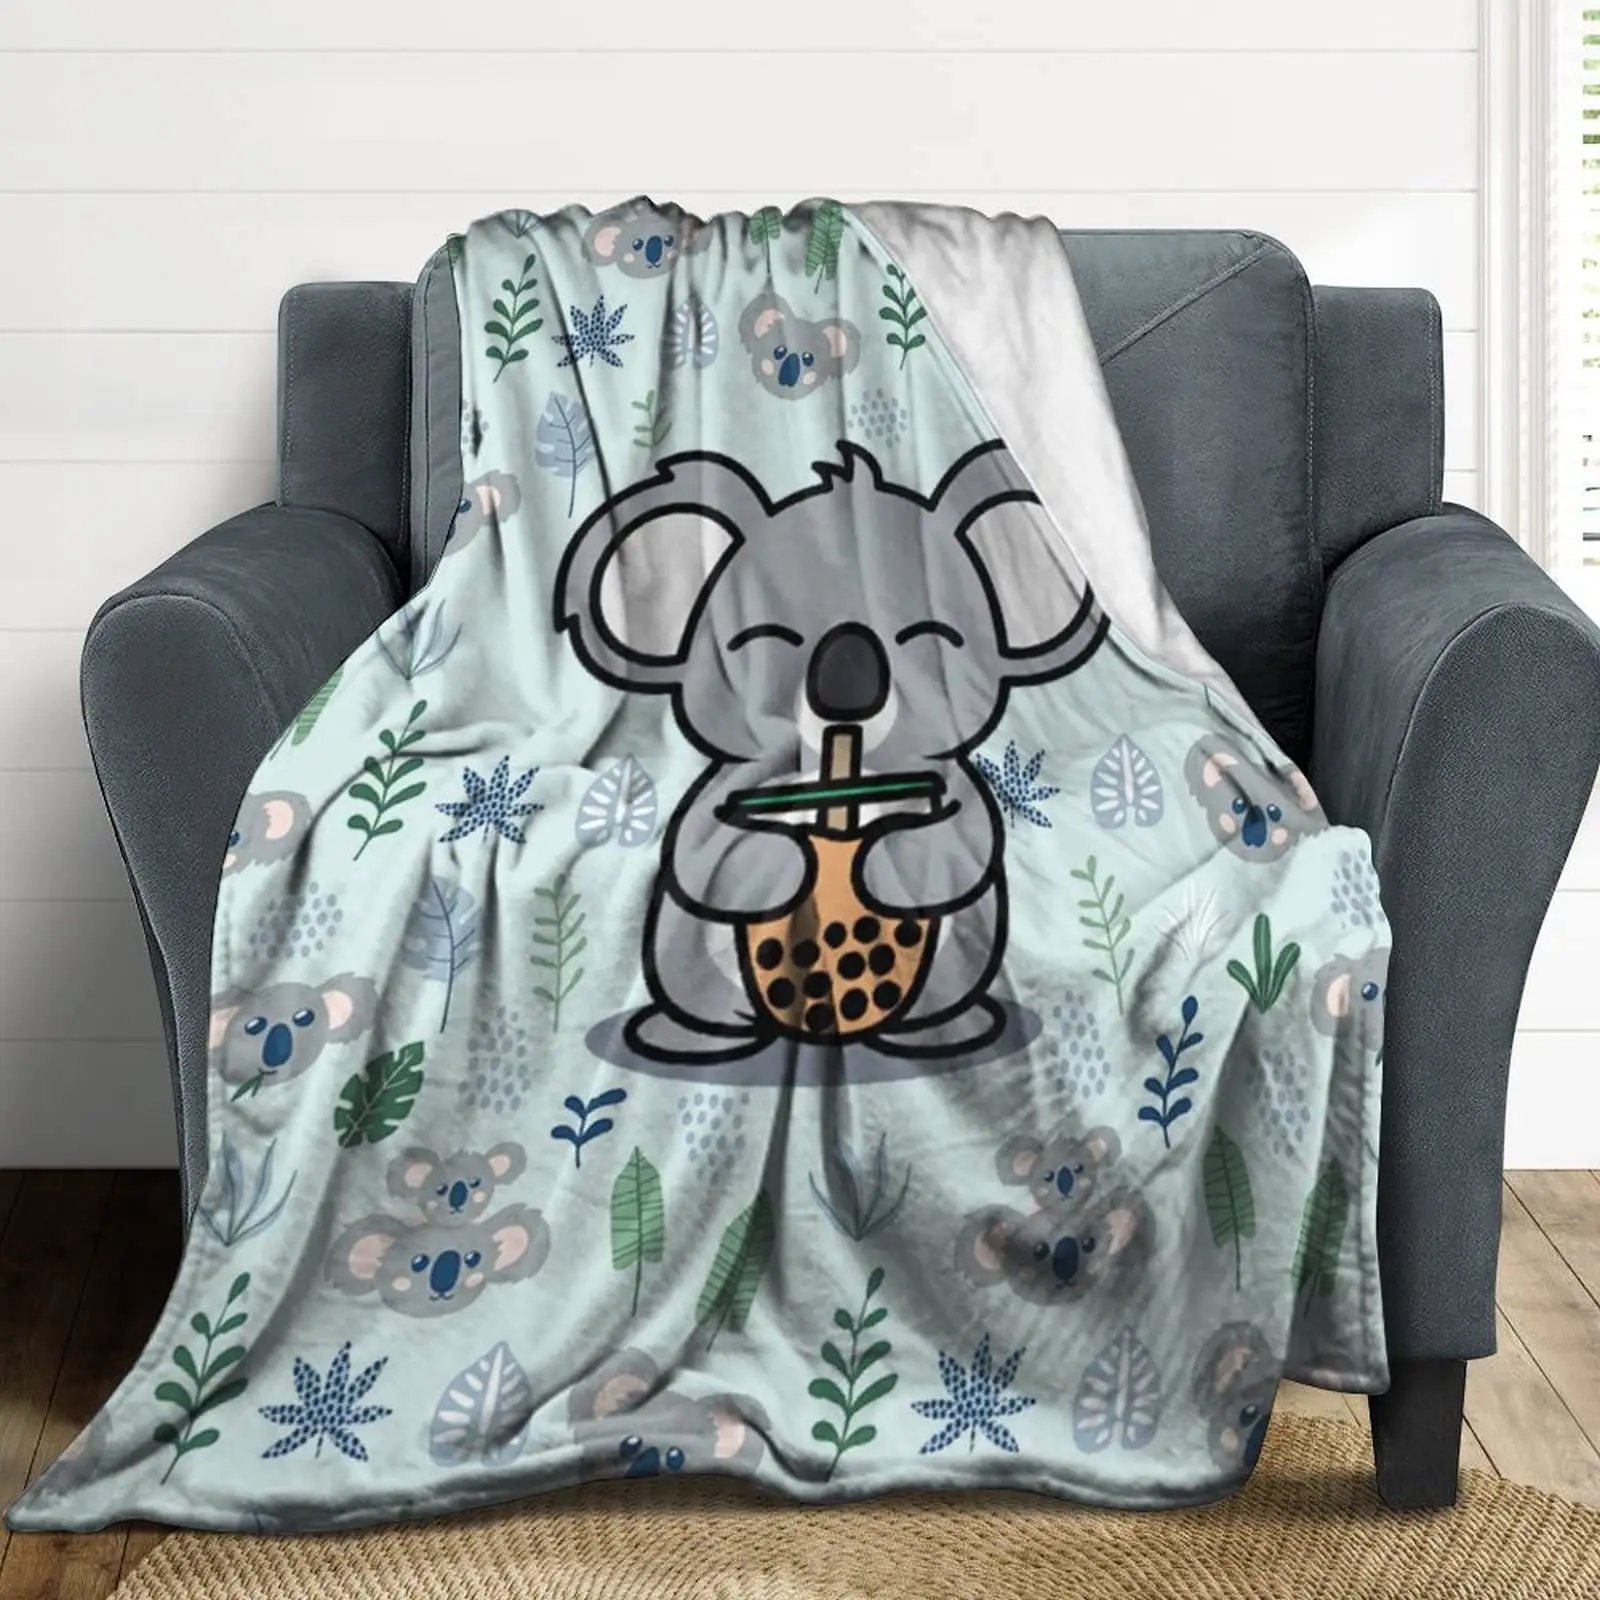 

Super Soft Fuzzy Home Decor for Teen Aldults Best Gift Koala Throw Blanket for Bed Sofa Couch Australian Animal Flannel Blankets